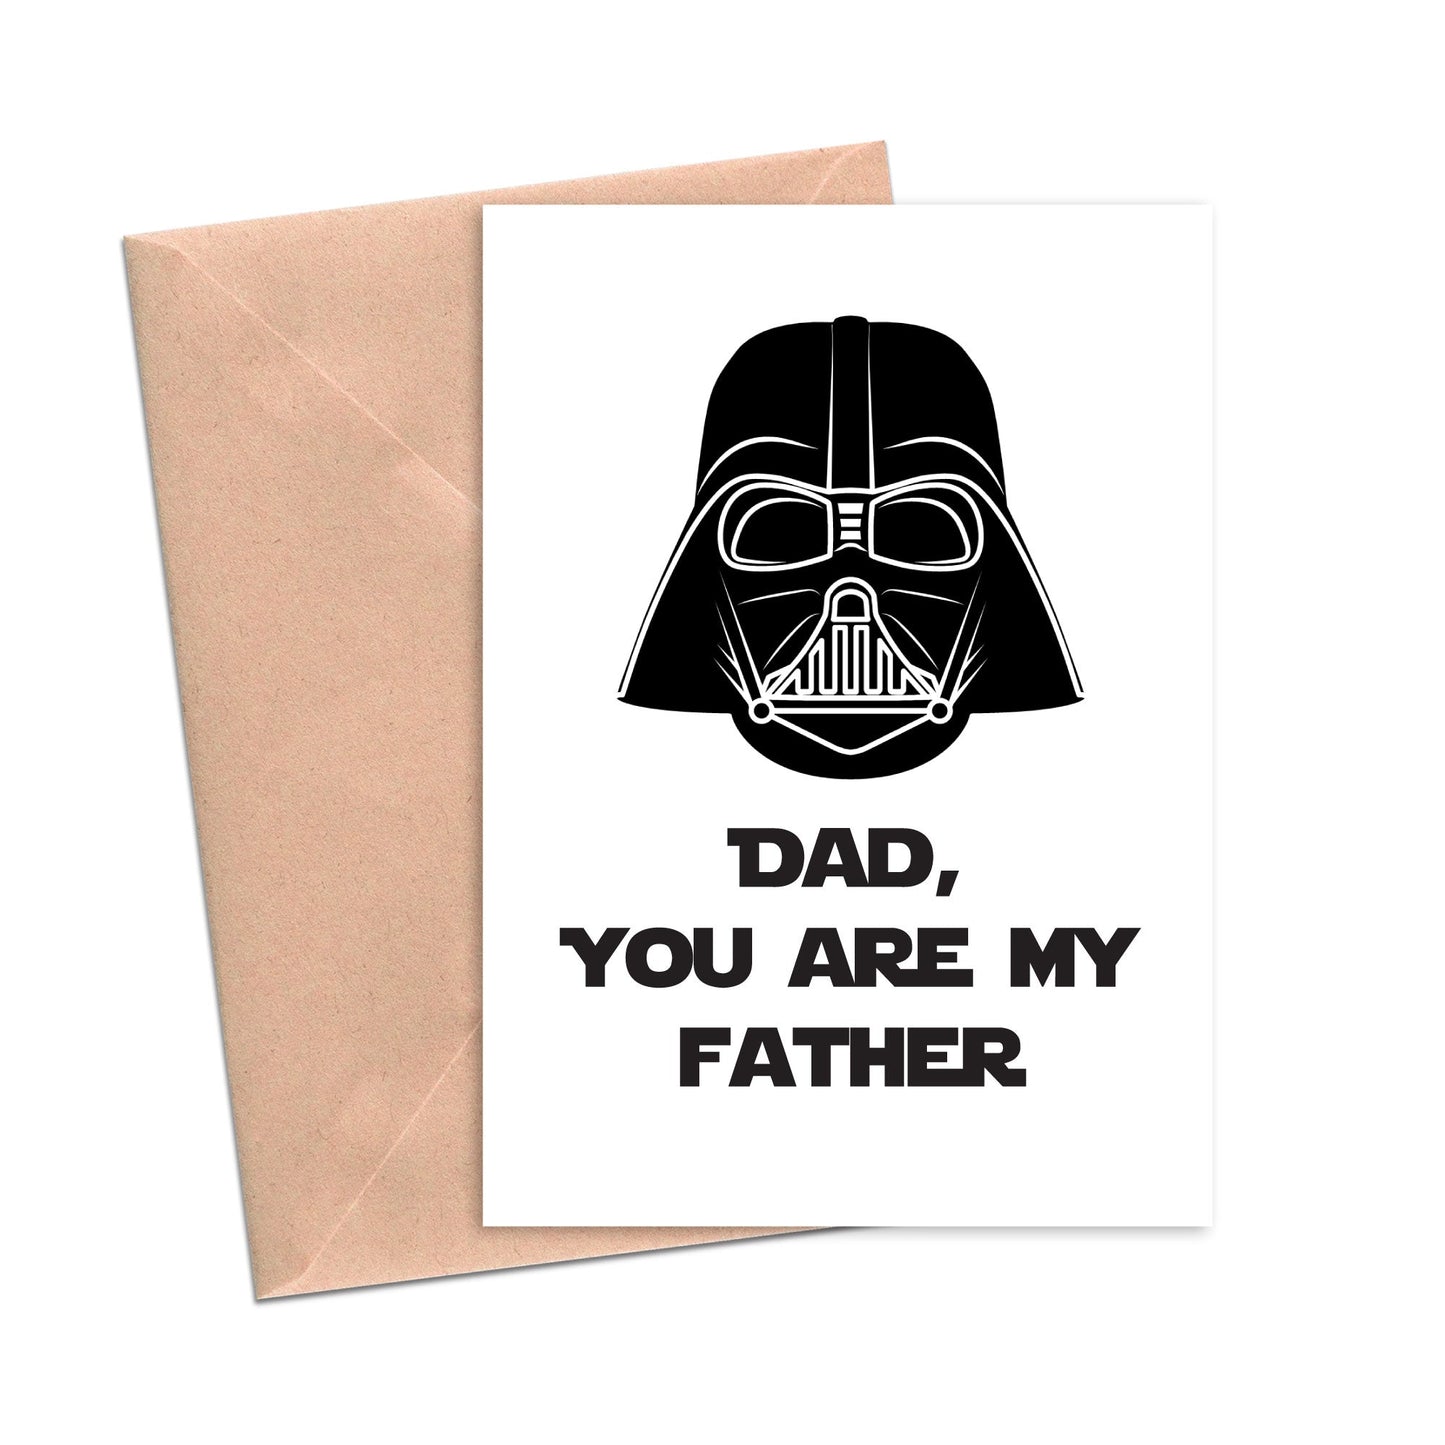 Funny Father's Day Card Dad You're My Darth Vader Funny Card for Dad-Mom and Dad-Crimson and Clover Studio